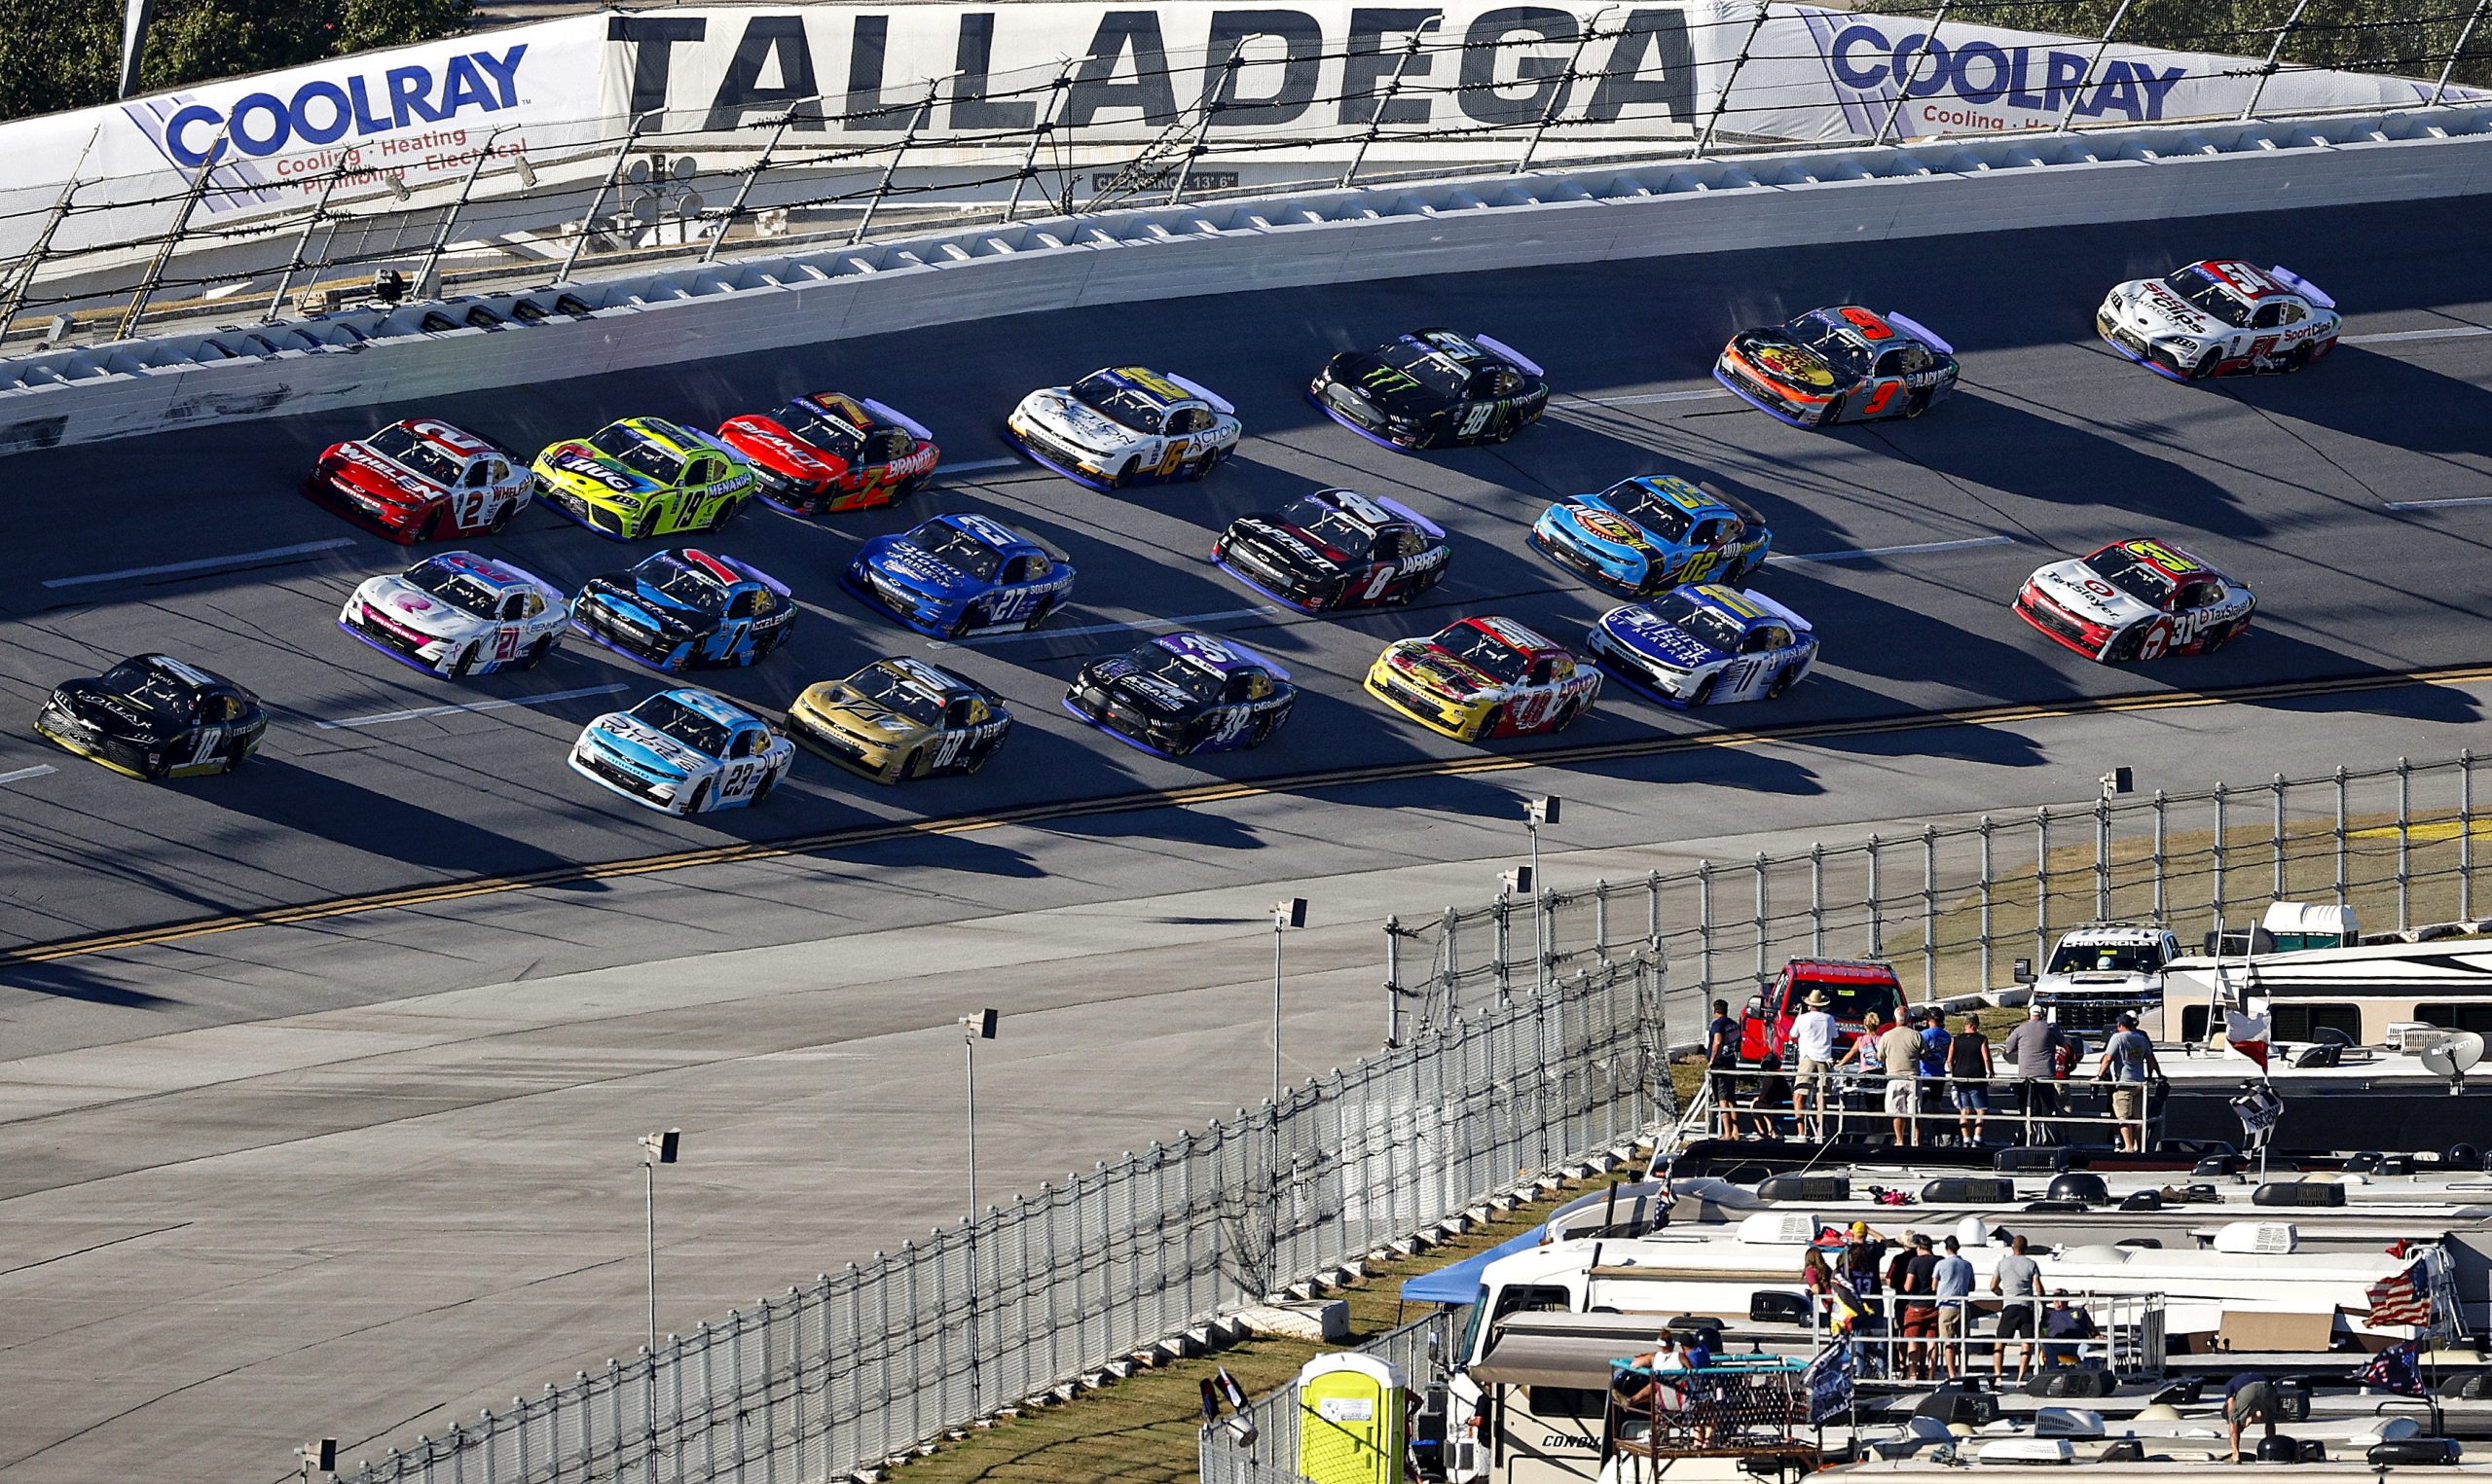 Credit: TALLADEGA, ALABAMA - OCTOBER 01: Trevor Bayne, driver of the #18 Dollar Concrete Toyota, leads the field during the NASCAR Xfinity Series Sparks 300 at Talladega Superspeedway on October 01, 2022 in Talladega, Alabama. (Photo by Chris Graythen/Getty Images)